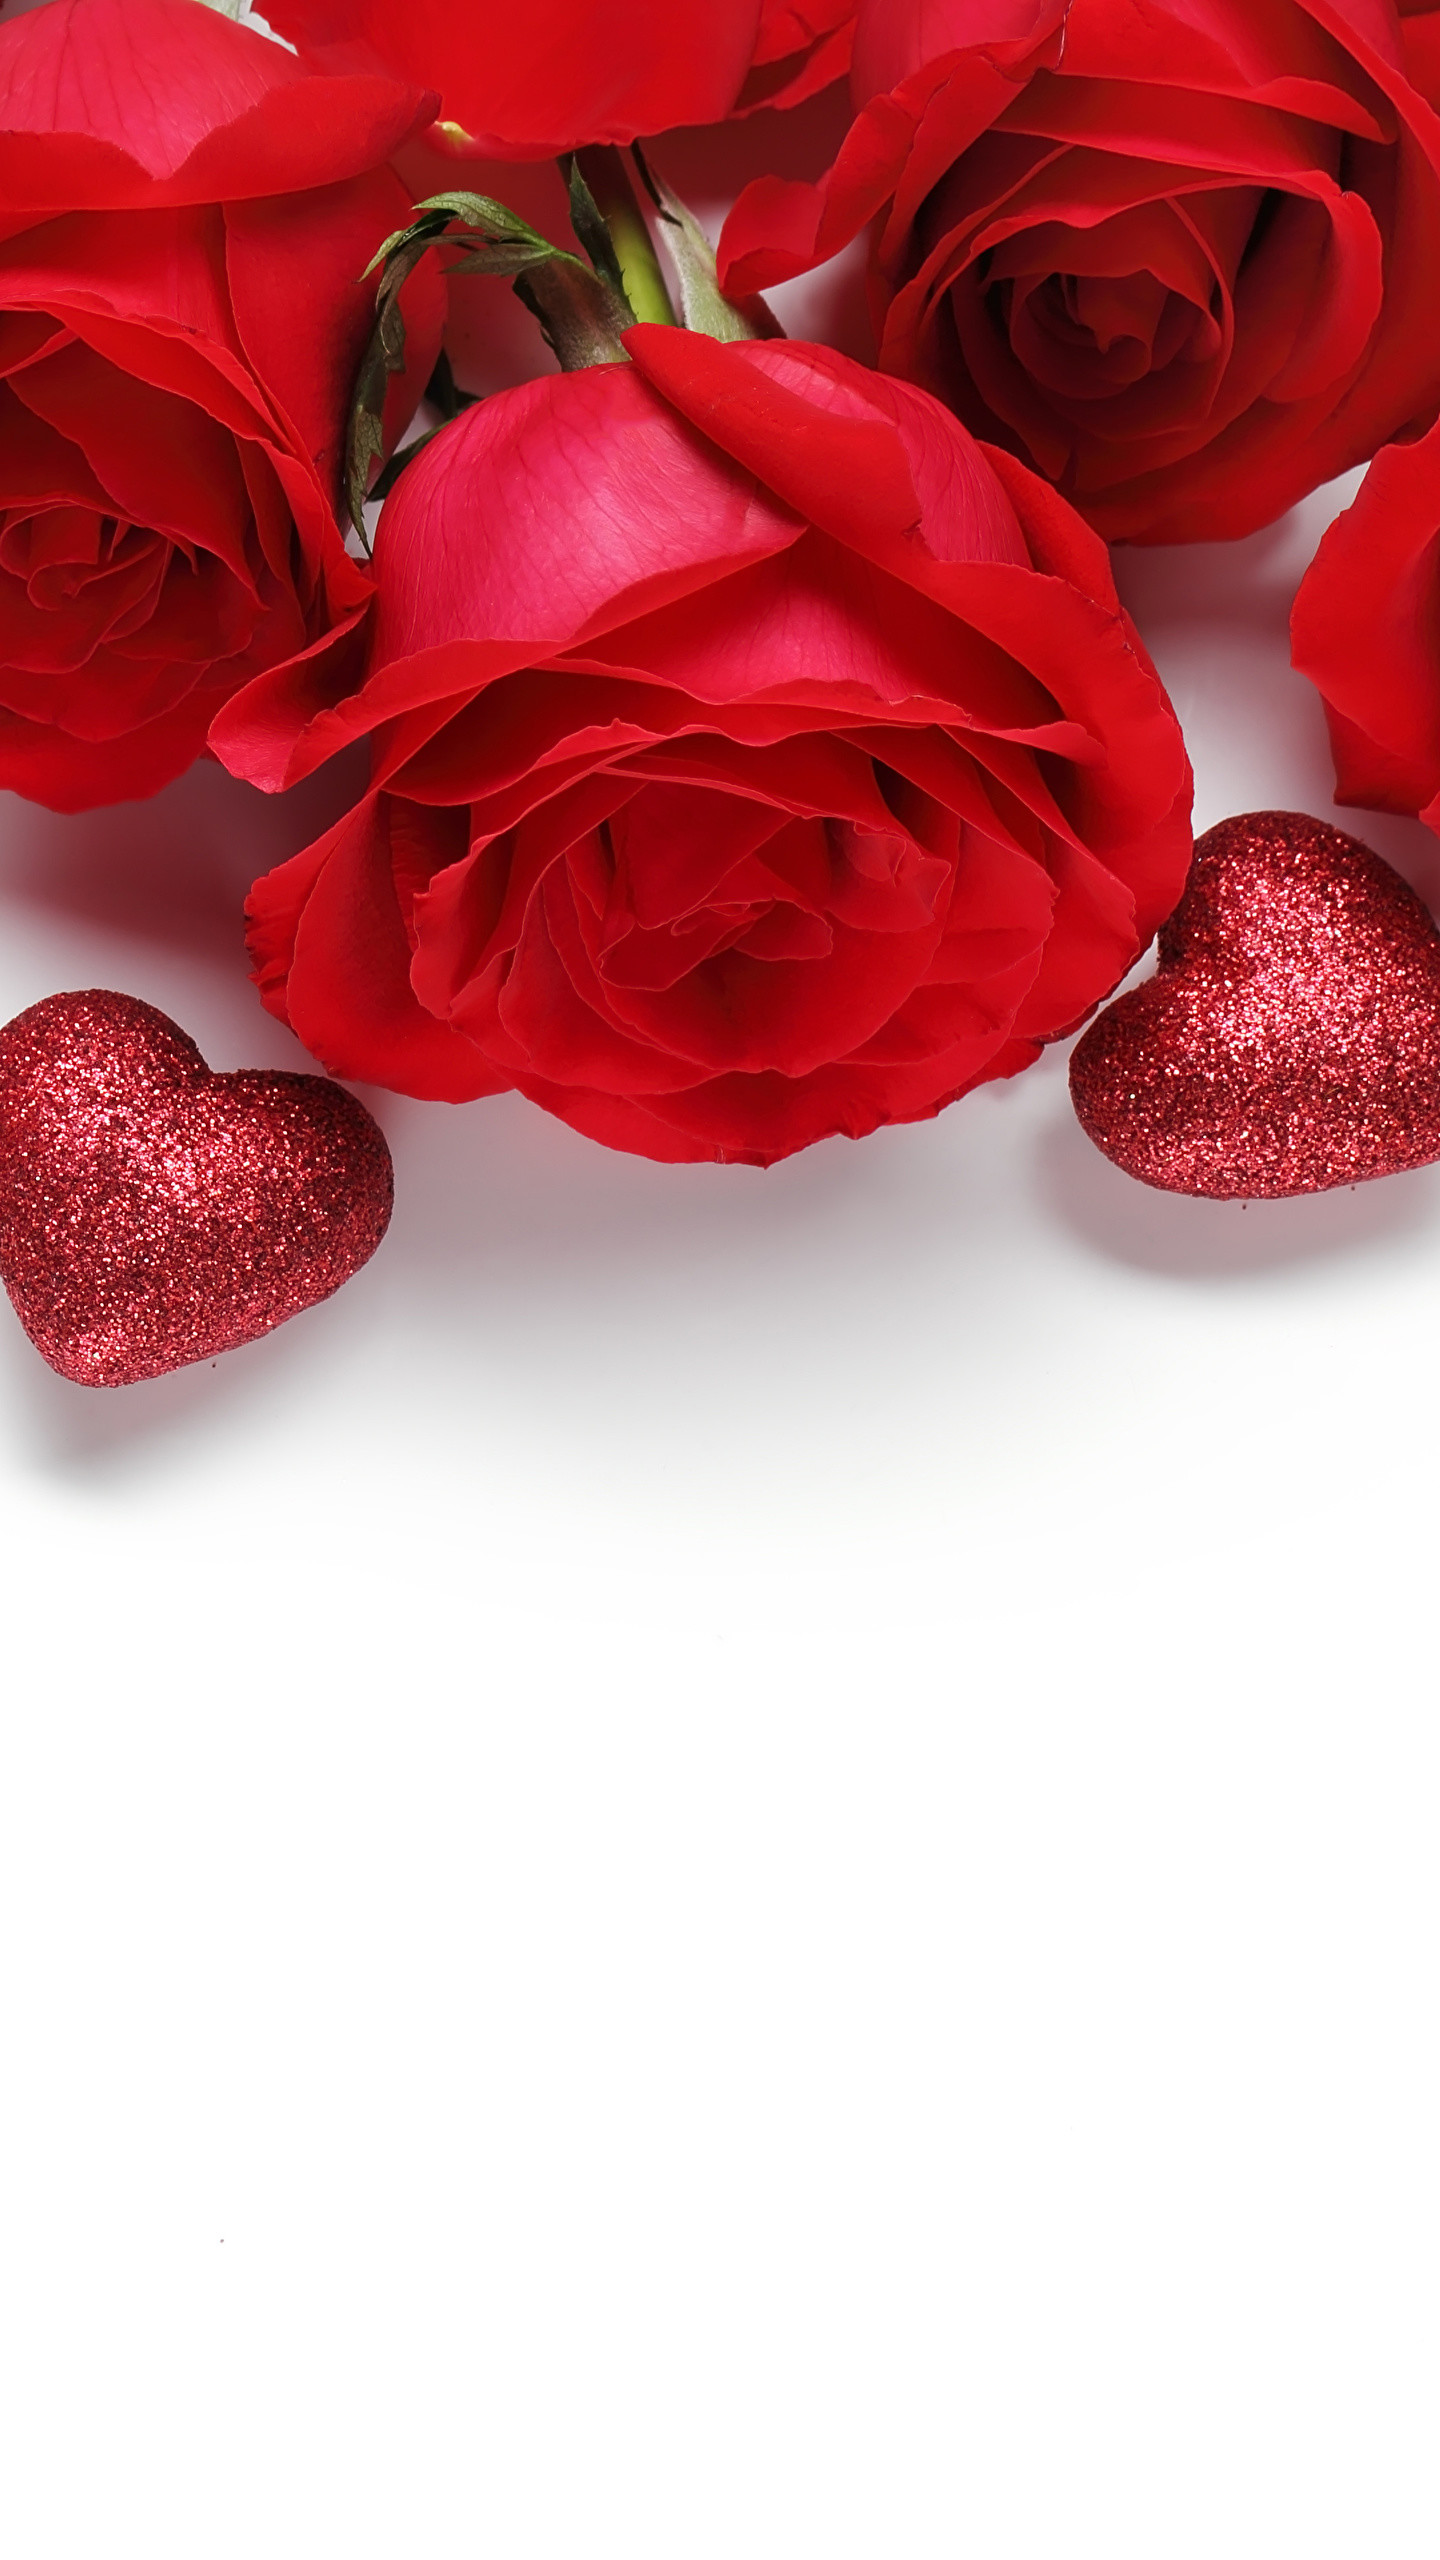 1440x2560 Wallpaper Valentine's Day Heart Red Roses Flowers White background 